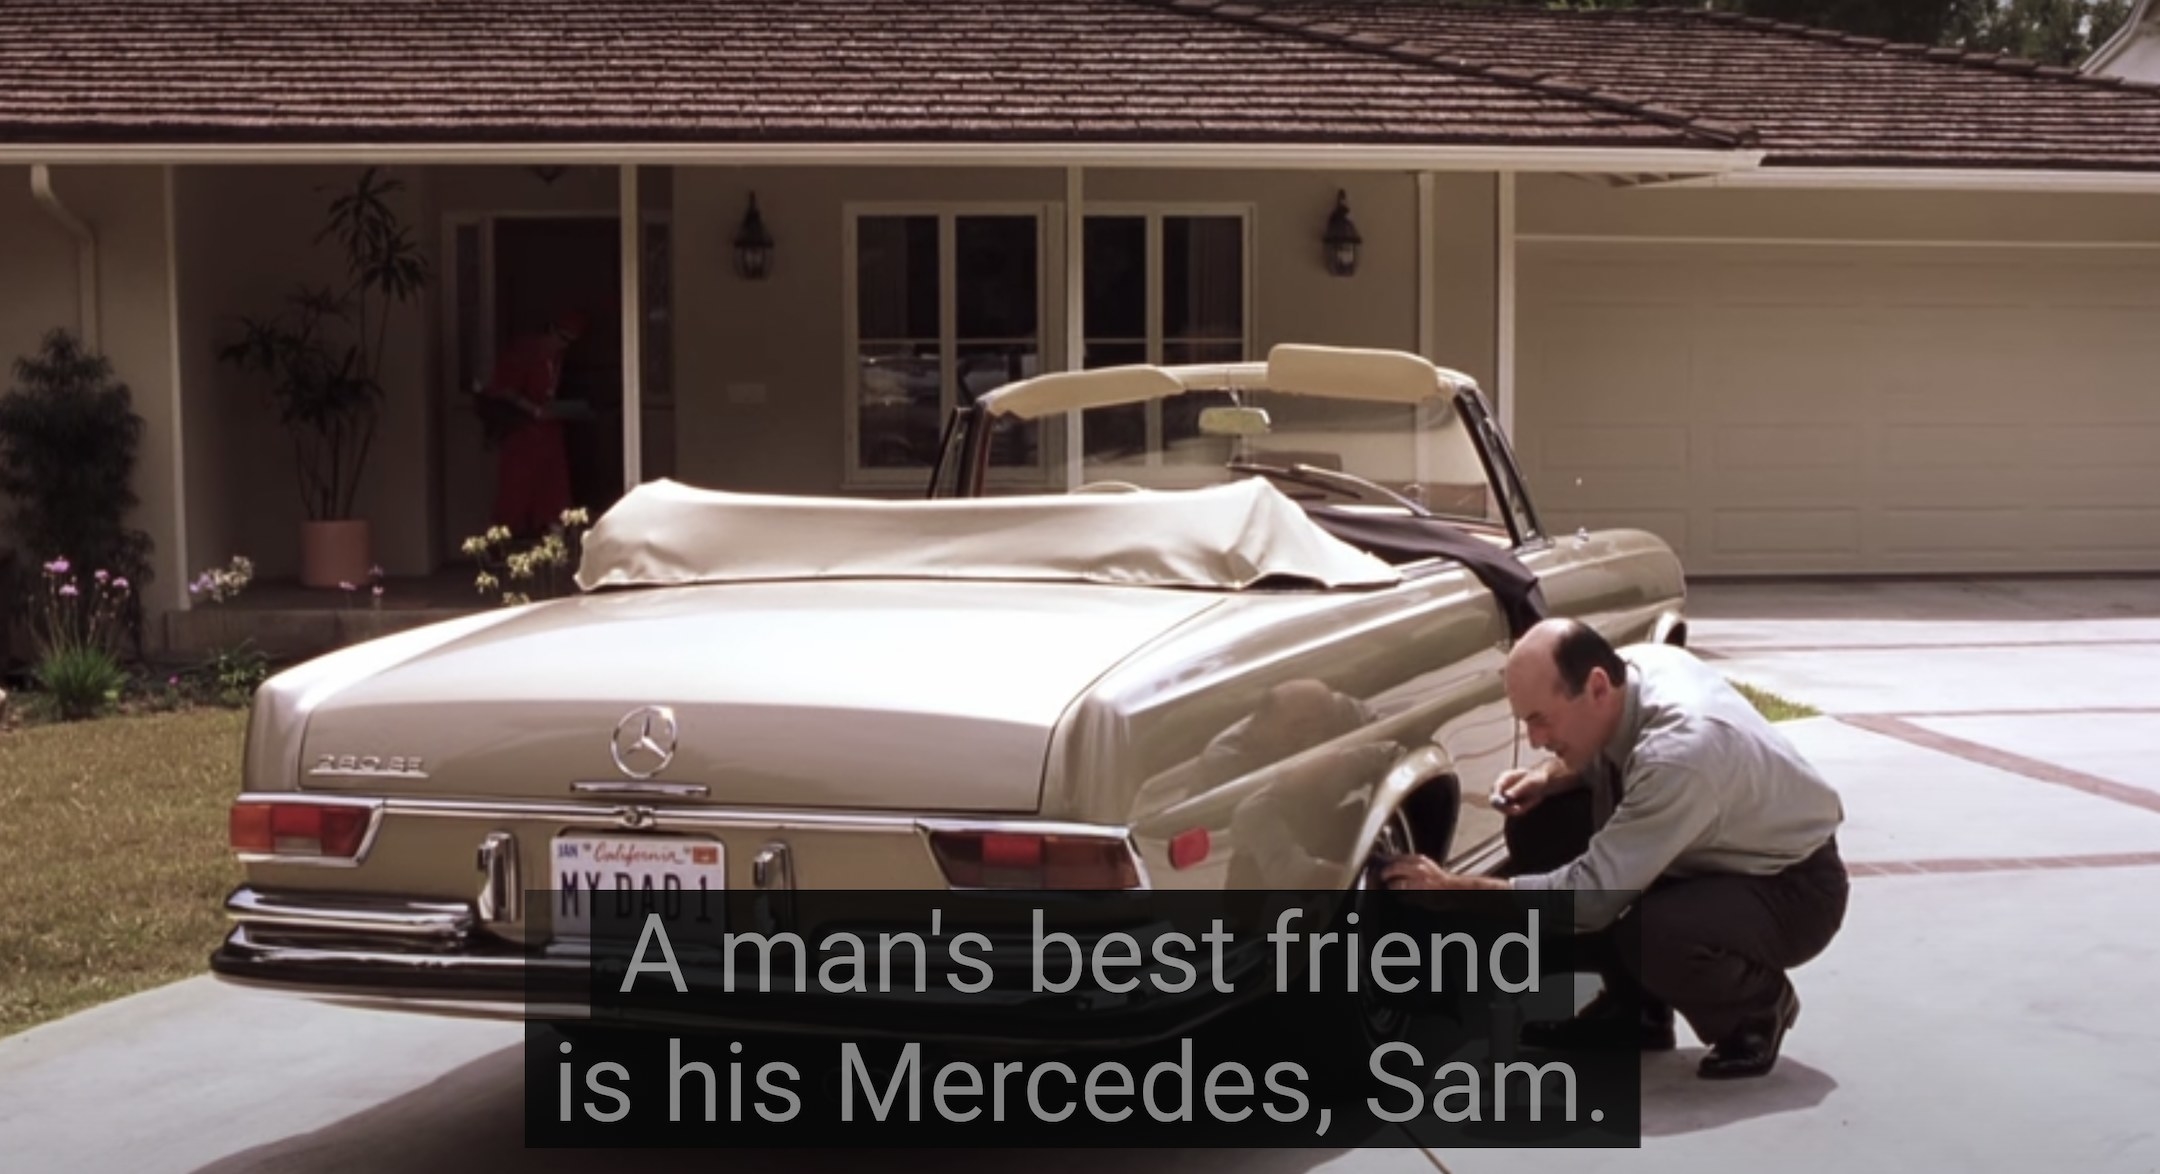 Carters dad cleaning his car and saying, A mans best friend is his Mercedes, Sam